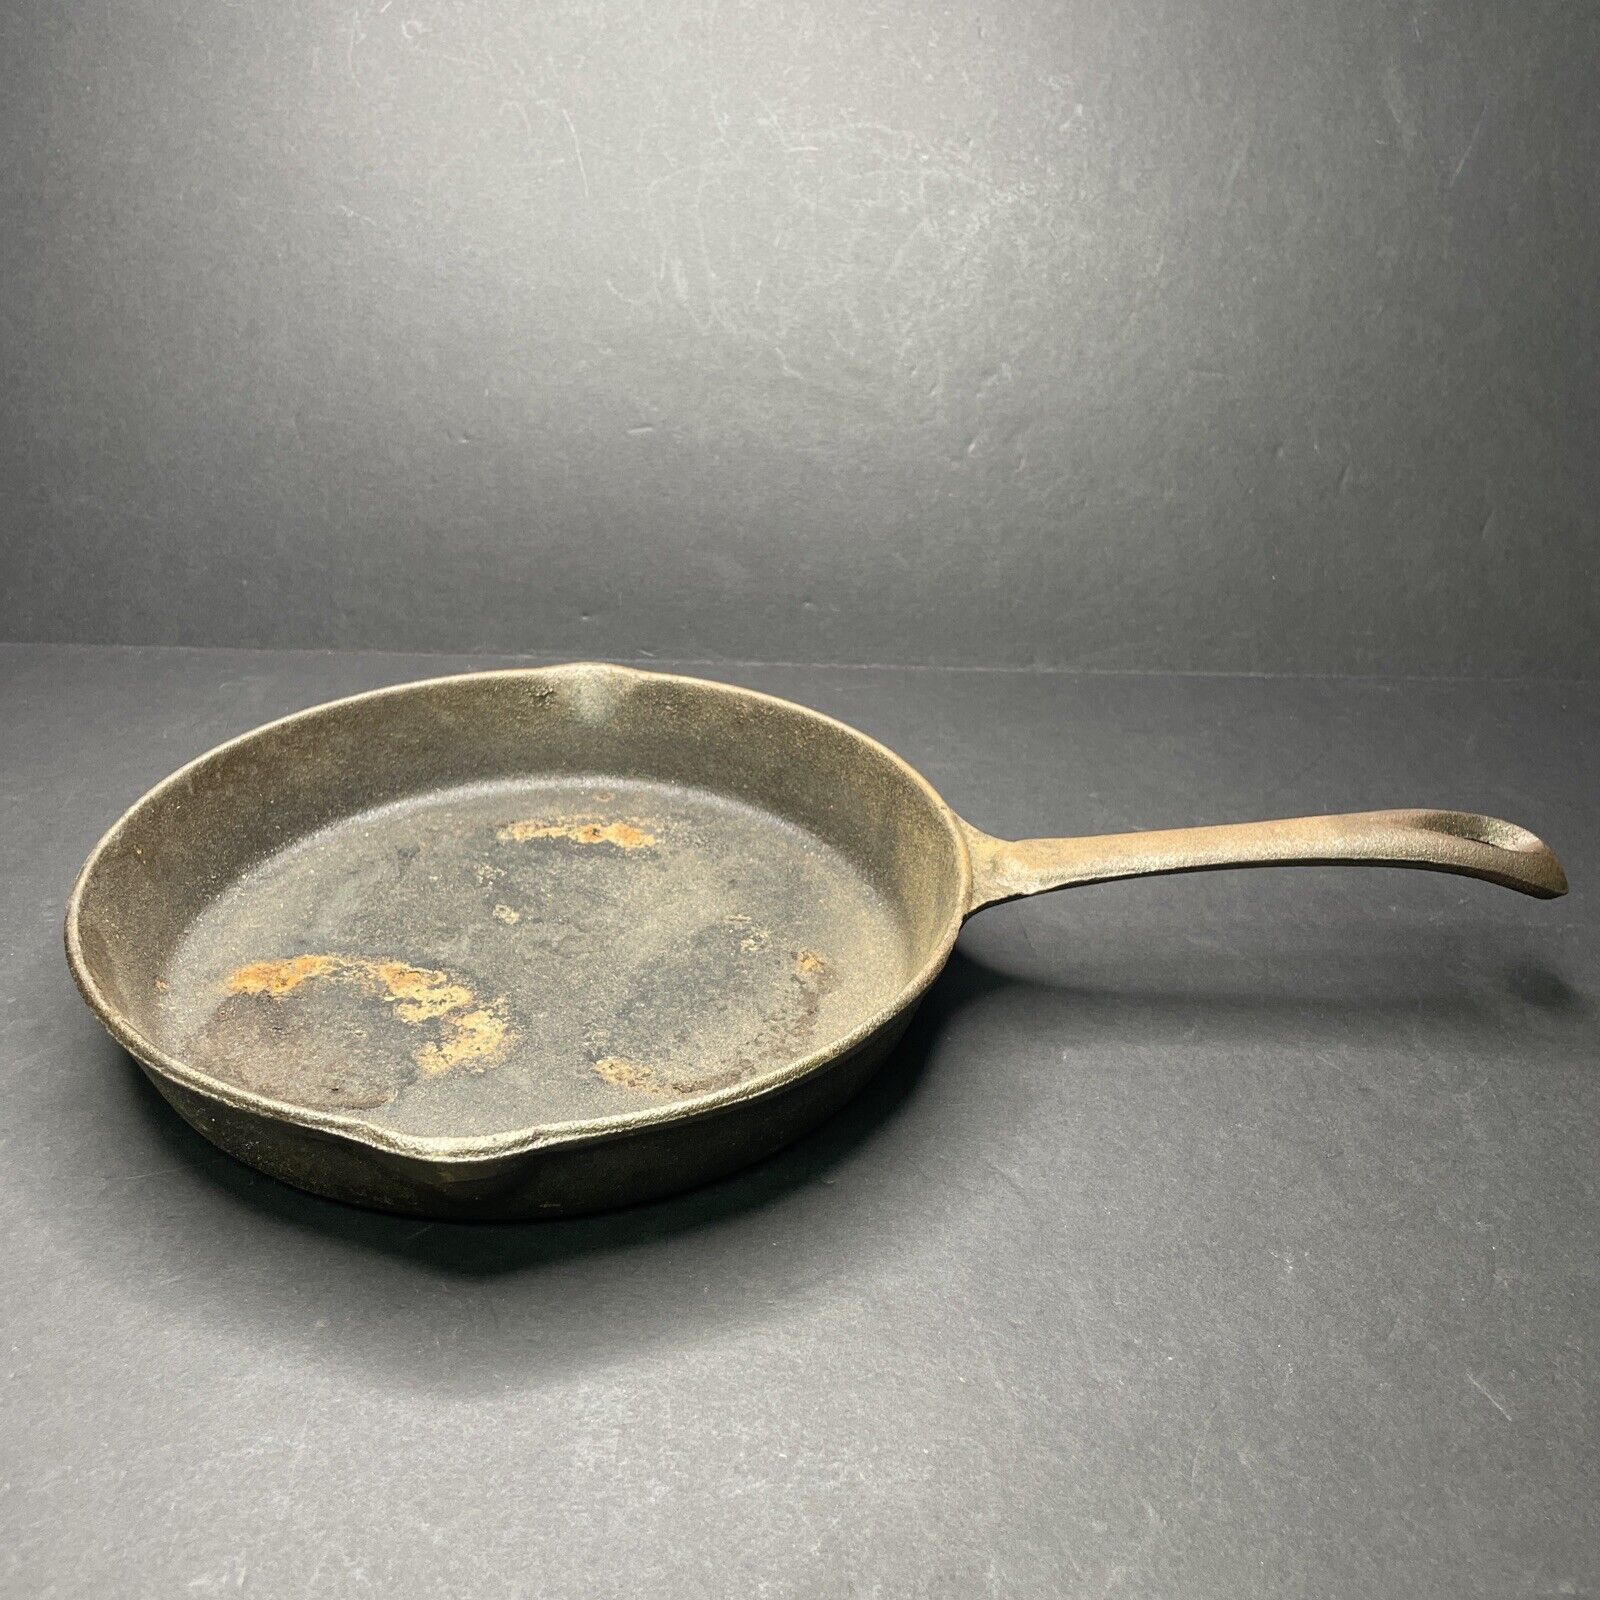 Antique c1910s Cast Iron Skillet Heavy Duty Frying Pan Foundry Poured Cookware